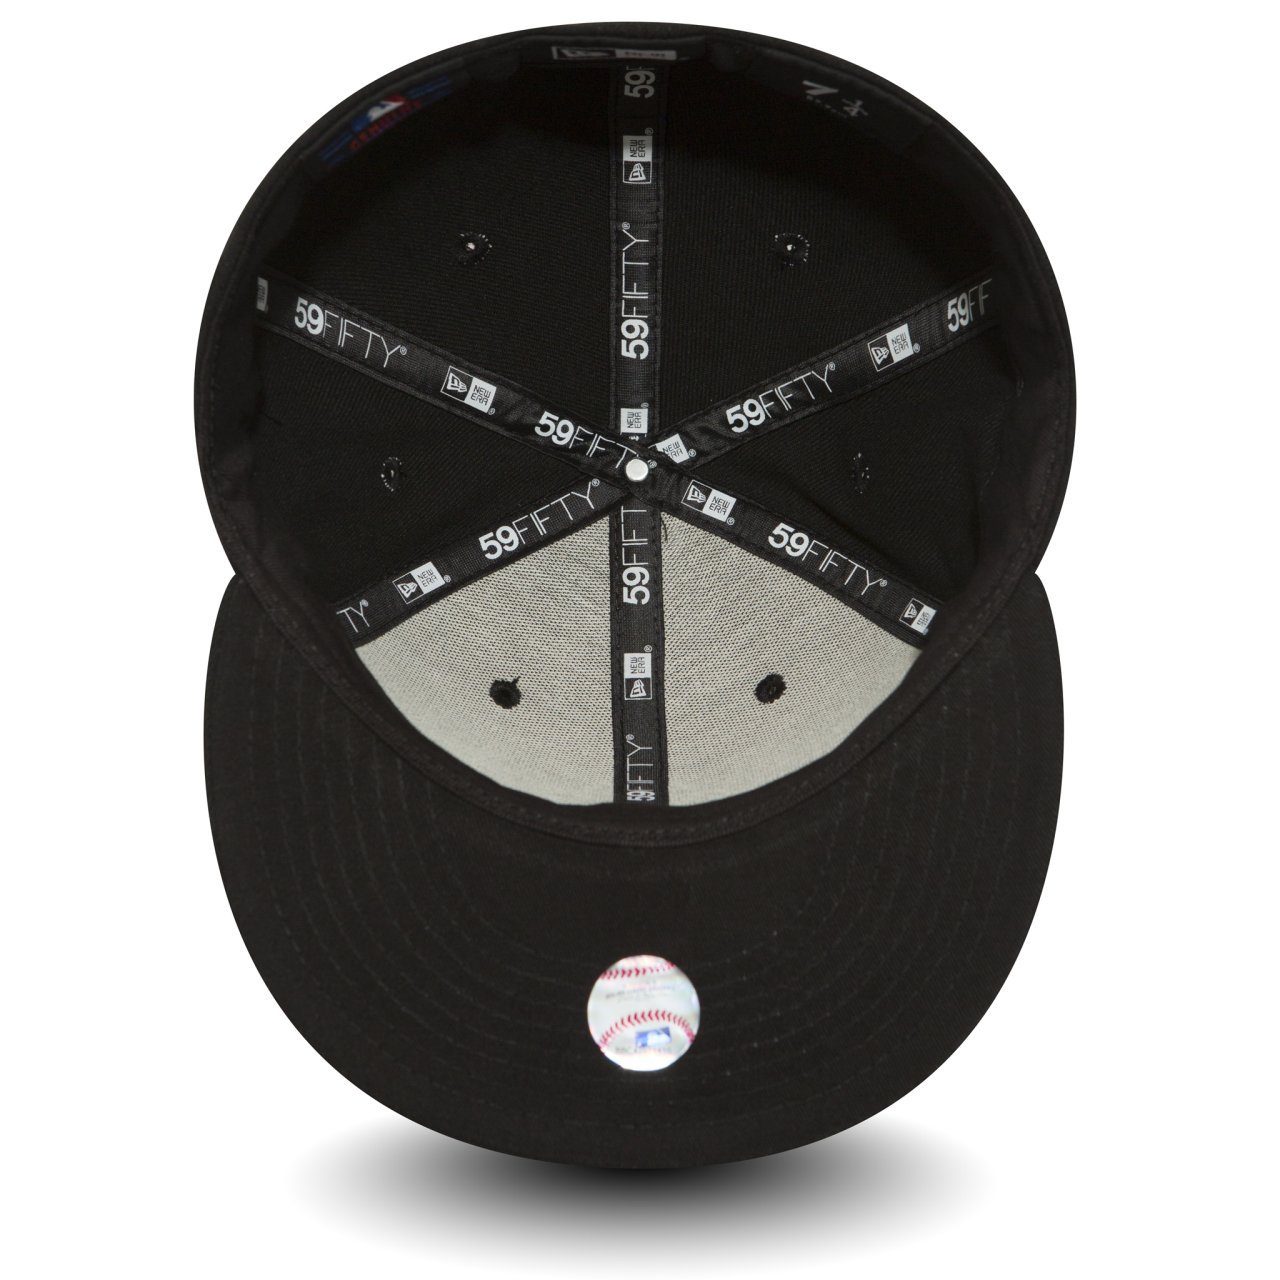 New Era Fitted Cap MLB 59Fifty Pittsburgh Pirates